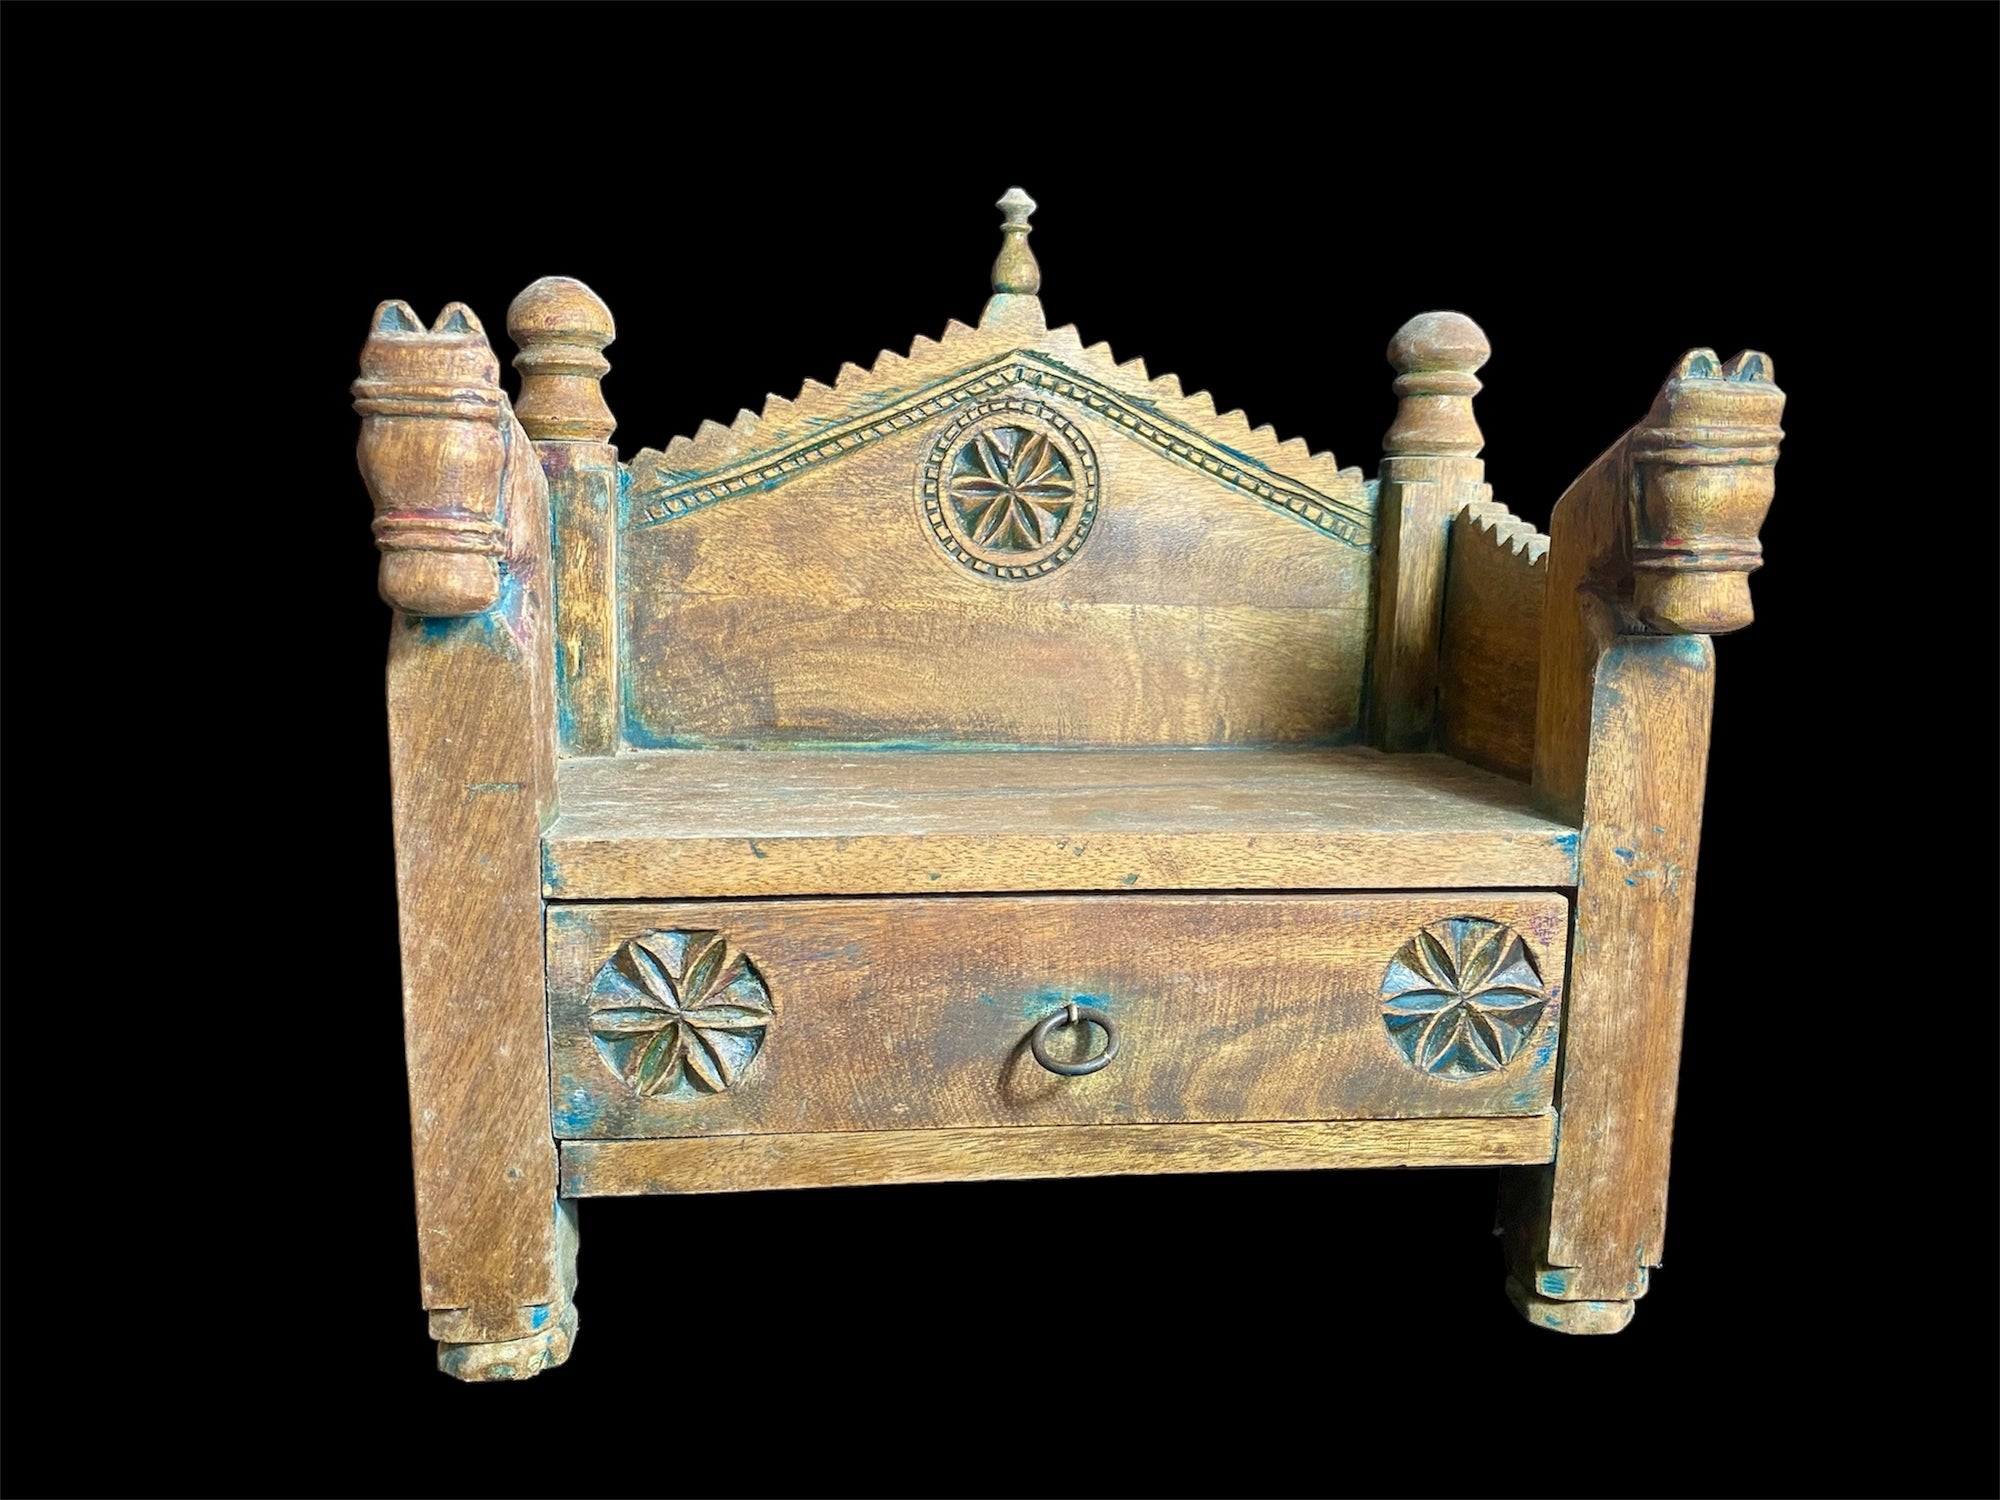 A vintage deity or god seat for seating a statue. Hand carved teak with two horse heads decorating the front. Northern Indian style but most likely made in southern India.  Dates to the early 20th century.